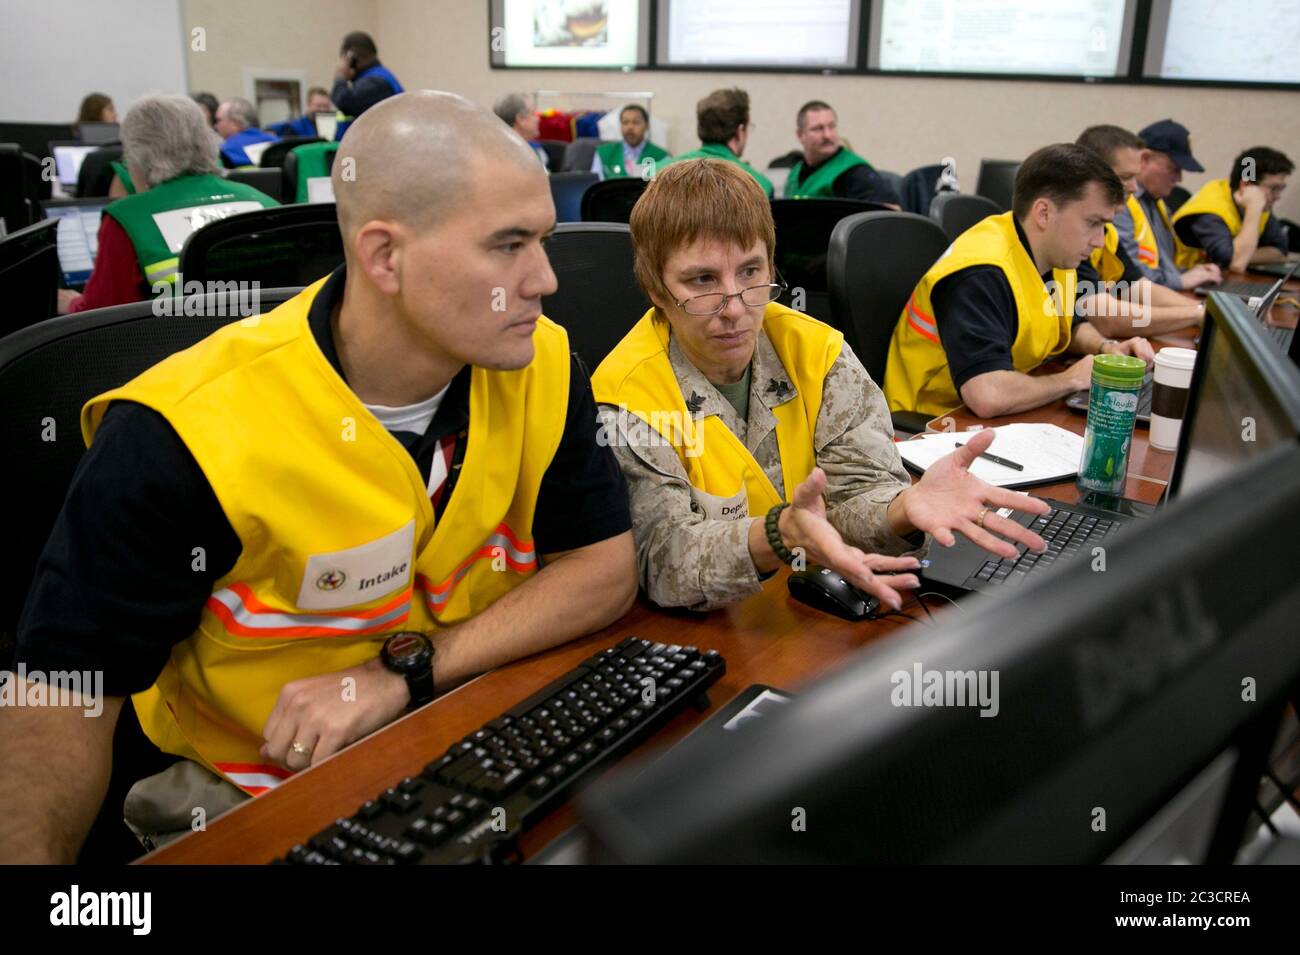 Austin, Texas USA, December 2013: Employees of the Texas Department of Public Safety and Texas Division of Emergency Management conduct an exercise to activate the full Emergency Management Council inside the newly renovated State Operations Center, which would be activated during emergencies and disasters.  ©Marjorie Kamys Cotera/Daemmrich Photography Stock Photo